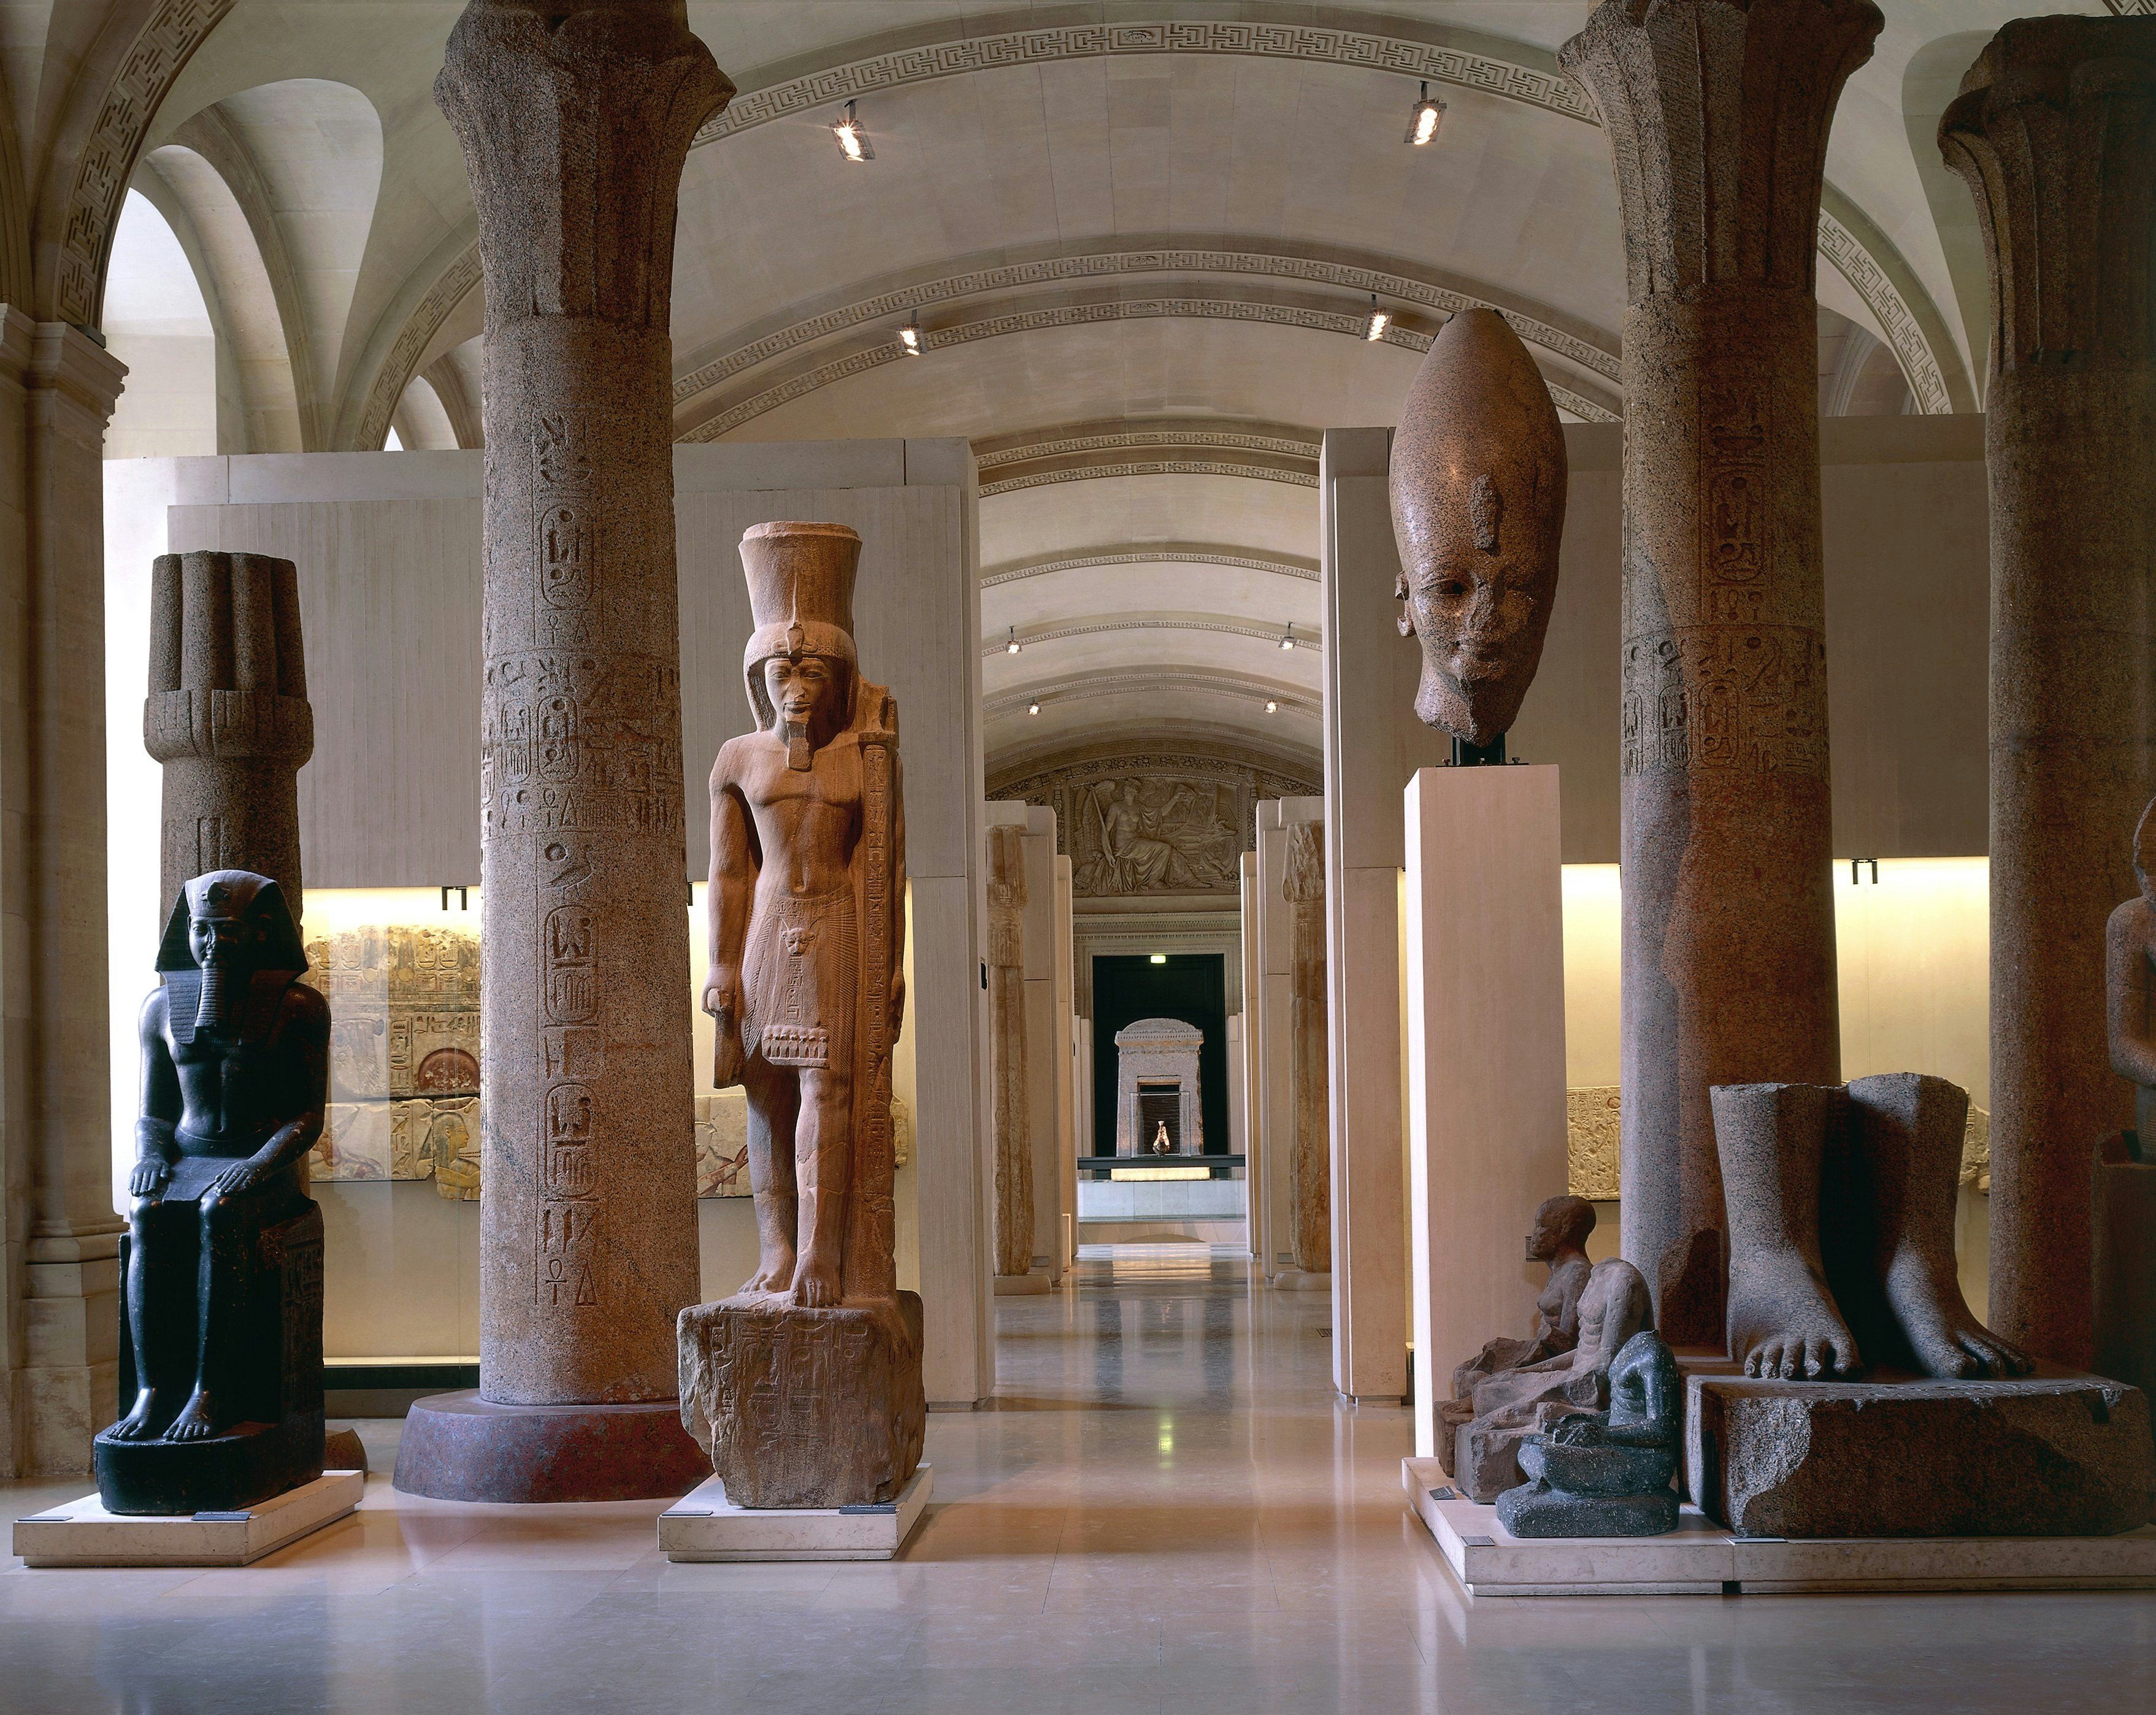 The Egyptian Antiquities room in the Lovure Museum is empty except for several statues of various sizes from Tanis, Karnak, and Thebes